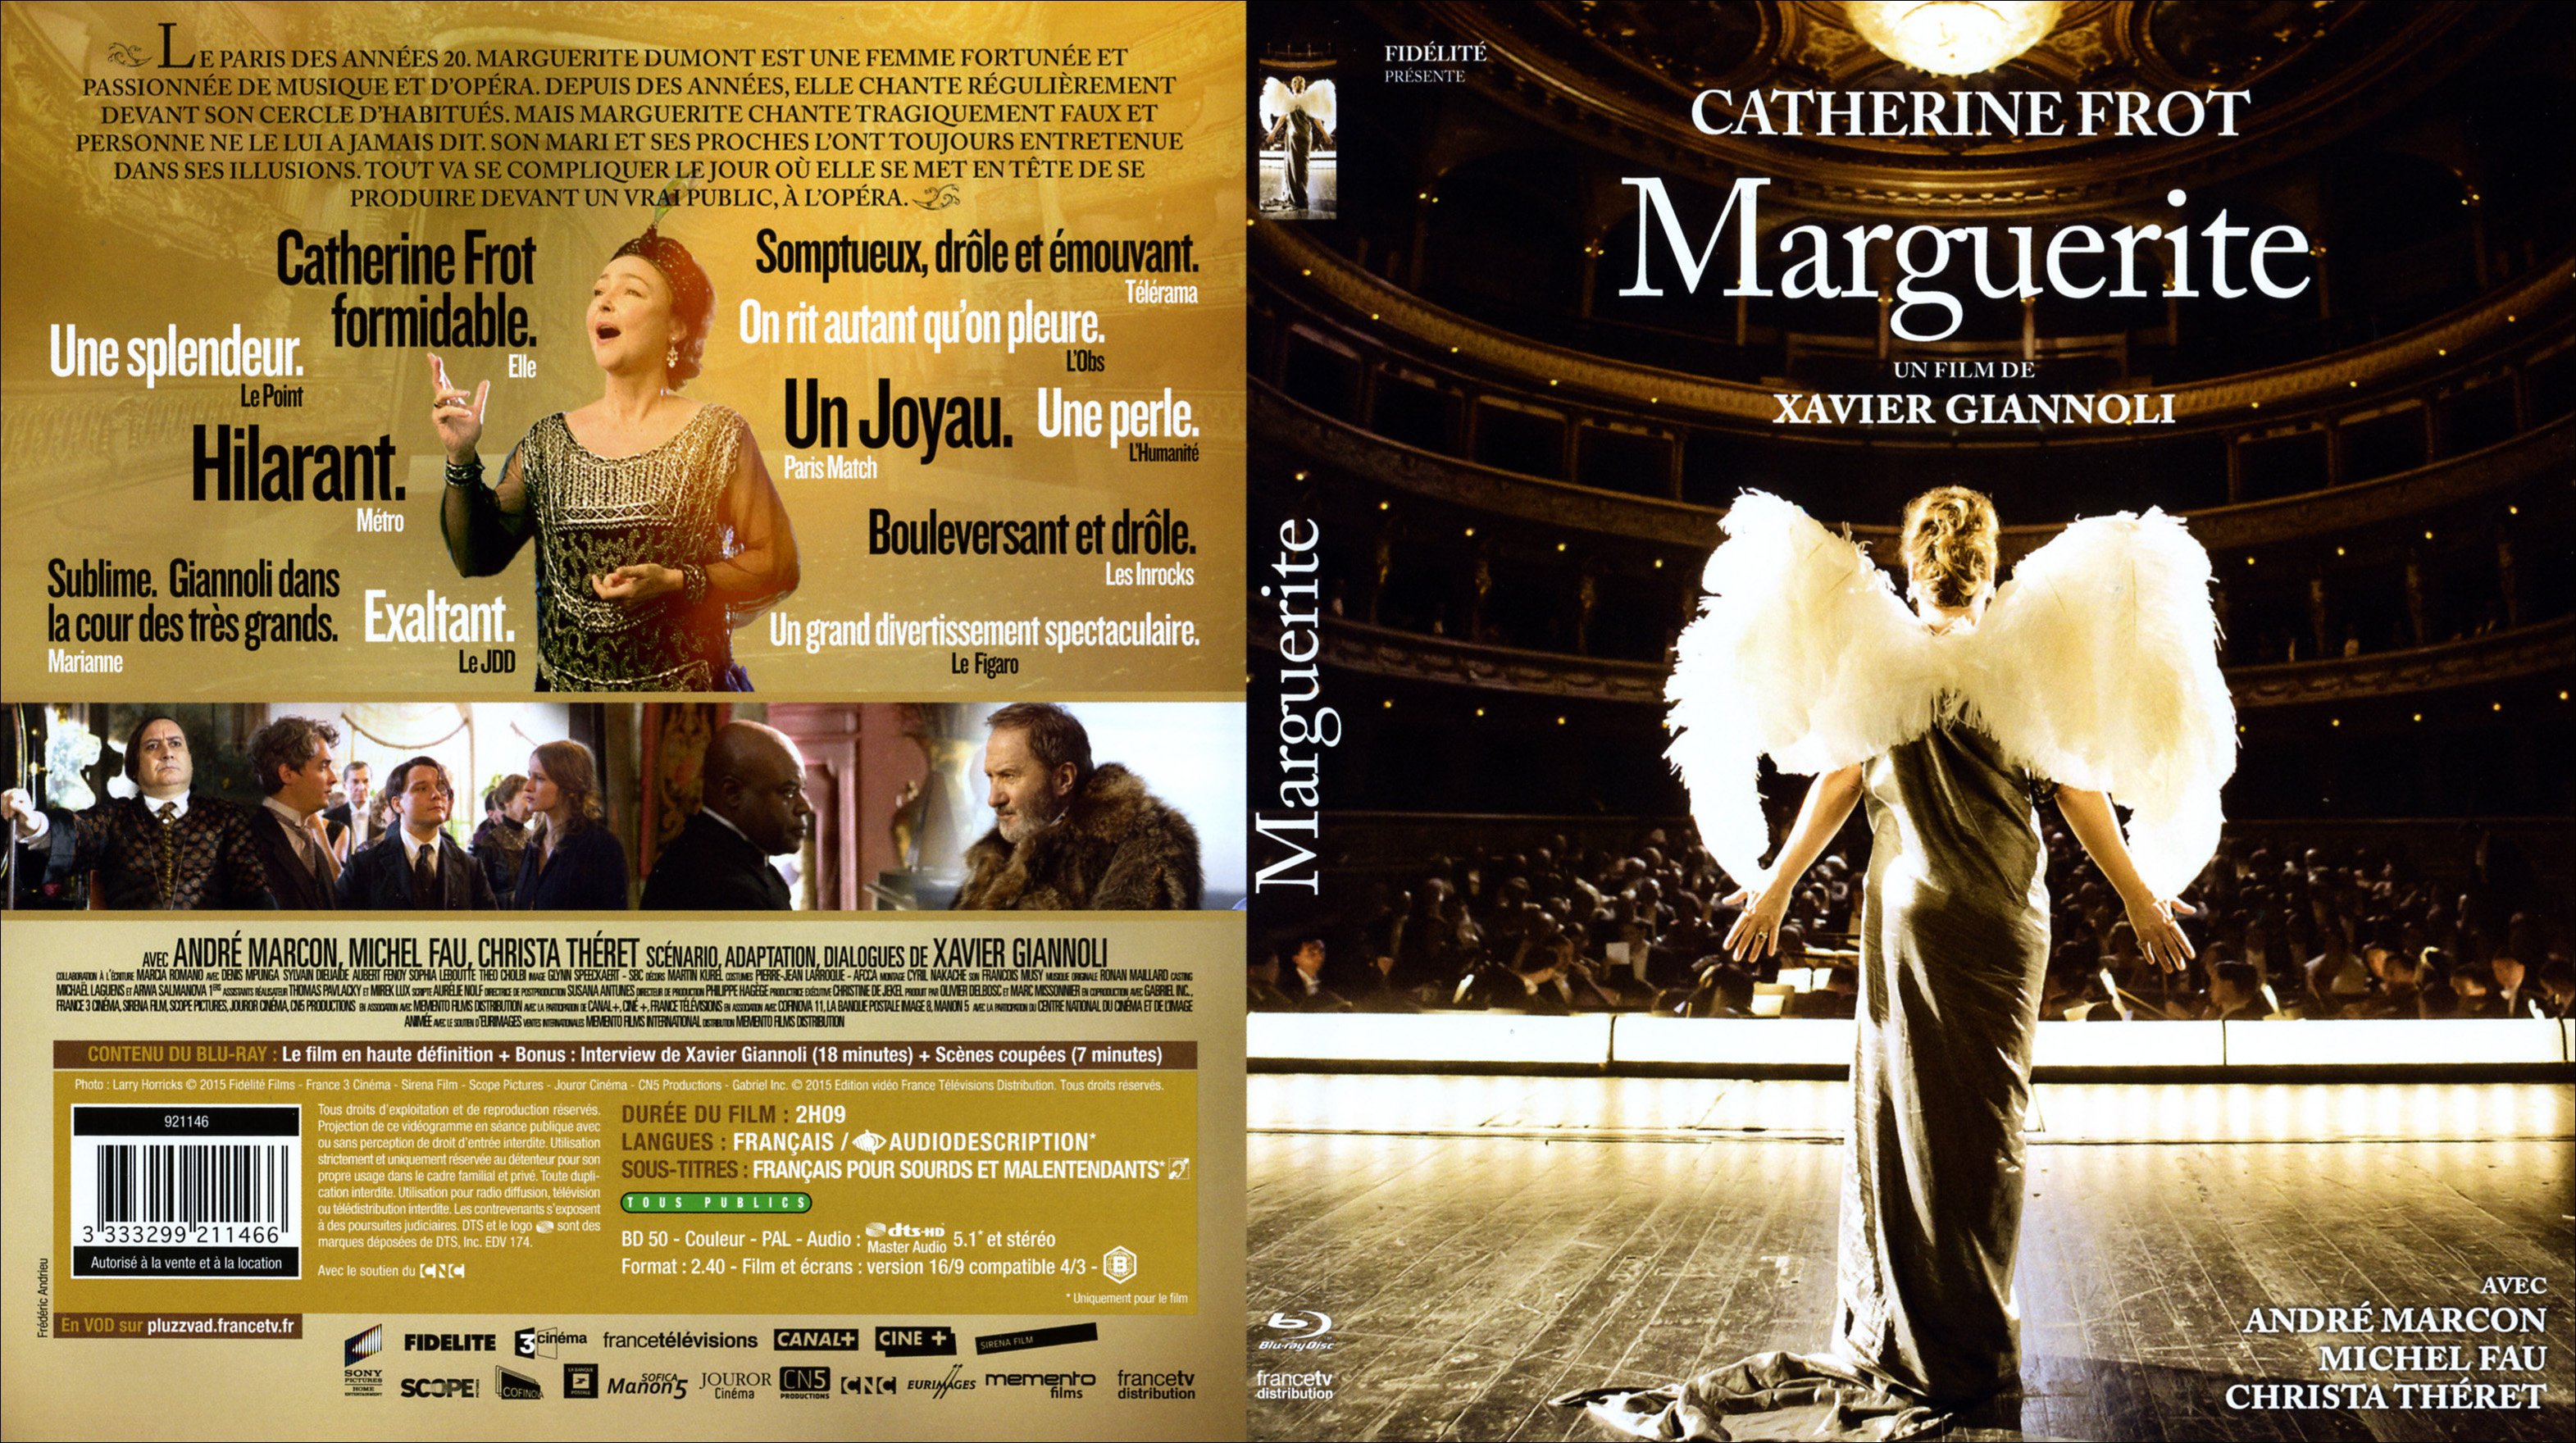 Jaquette DVD Marguerite (BLU-RAY)